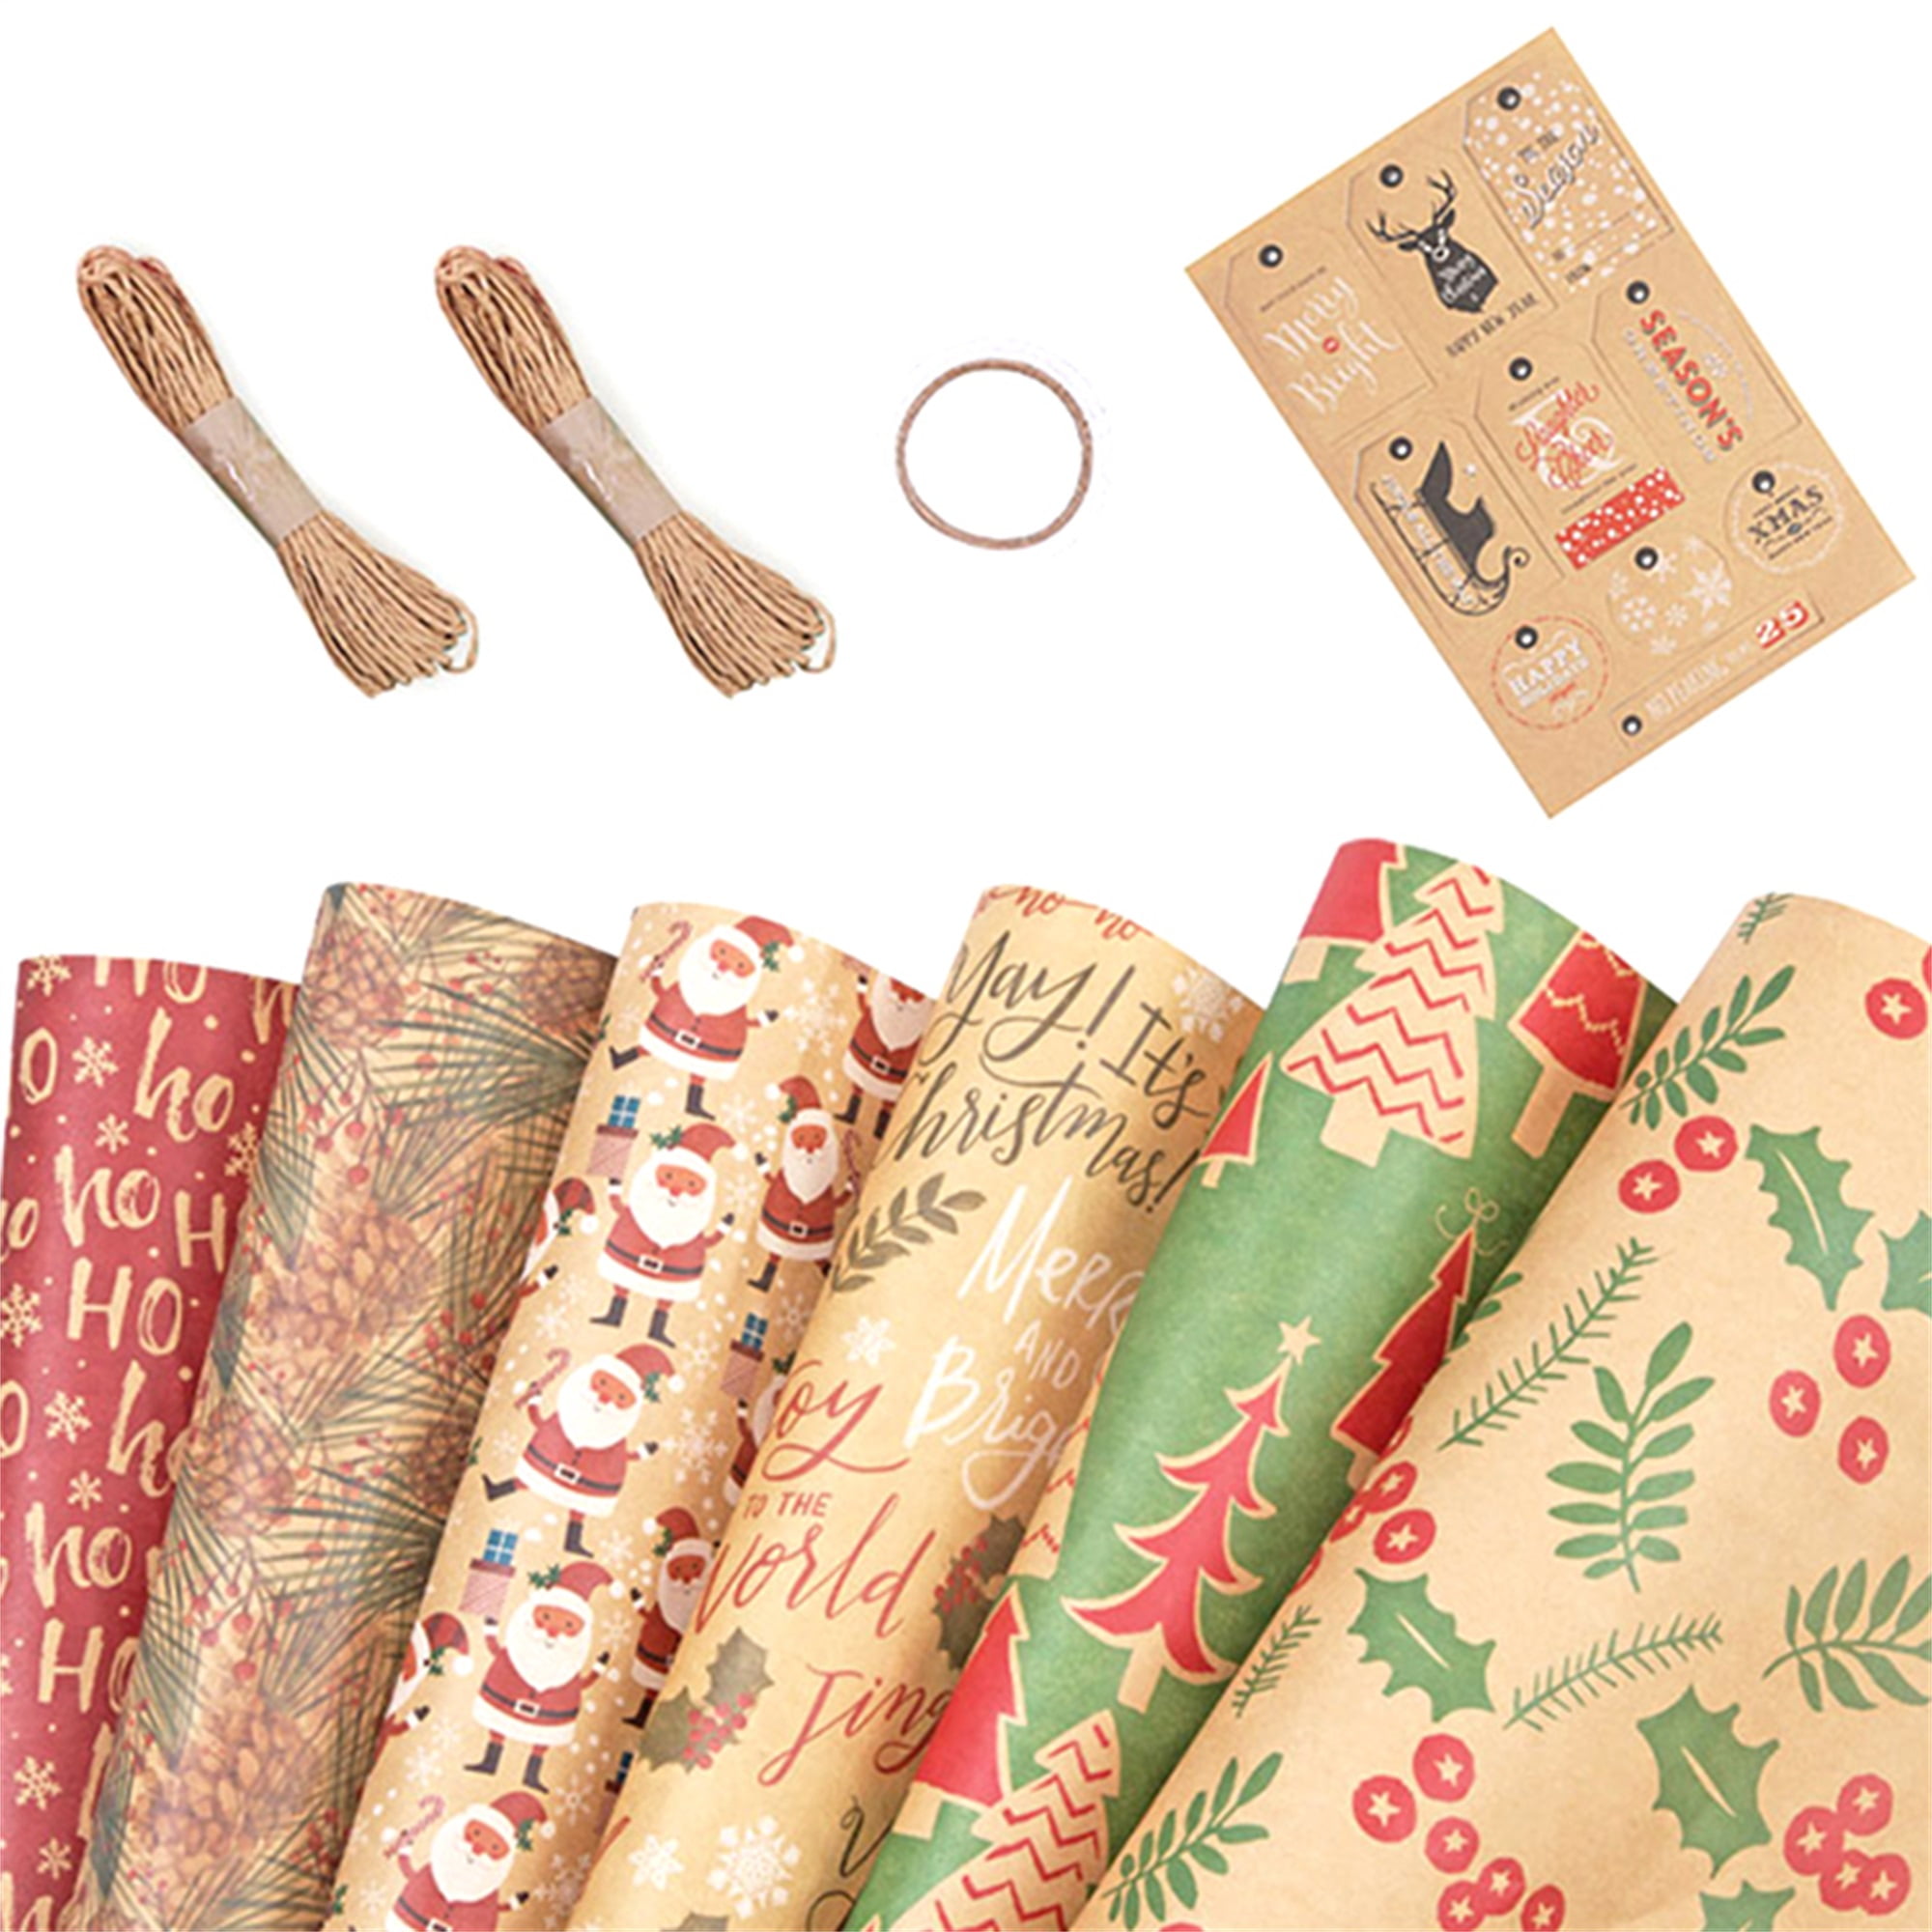 5M Christmas Gift Wrapping Paper Rolls 20 Matching Foil Gift Tags 4 Rolls 